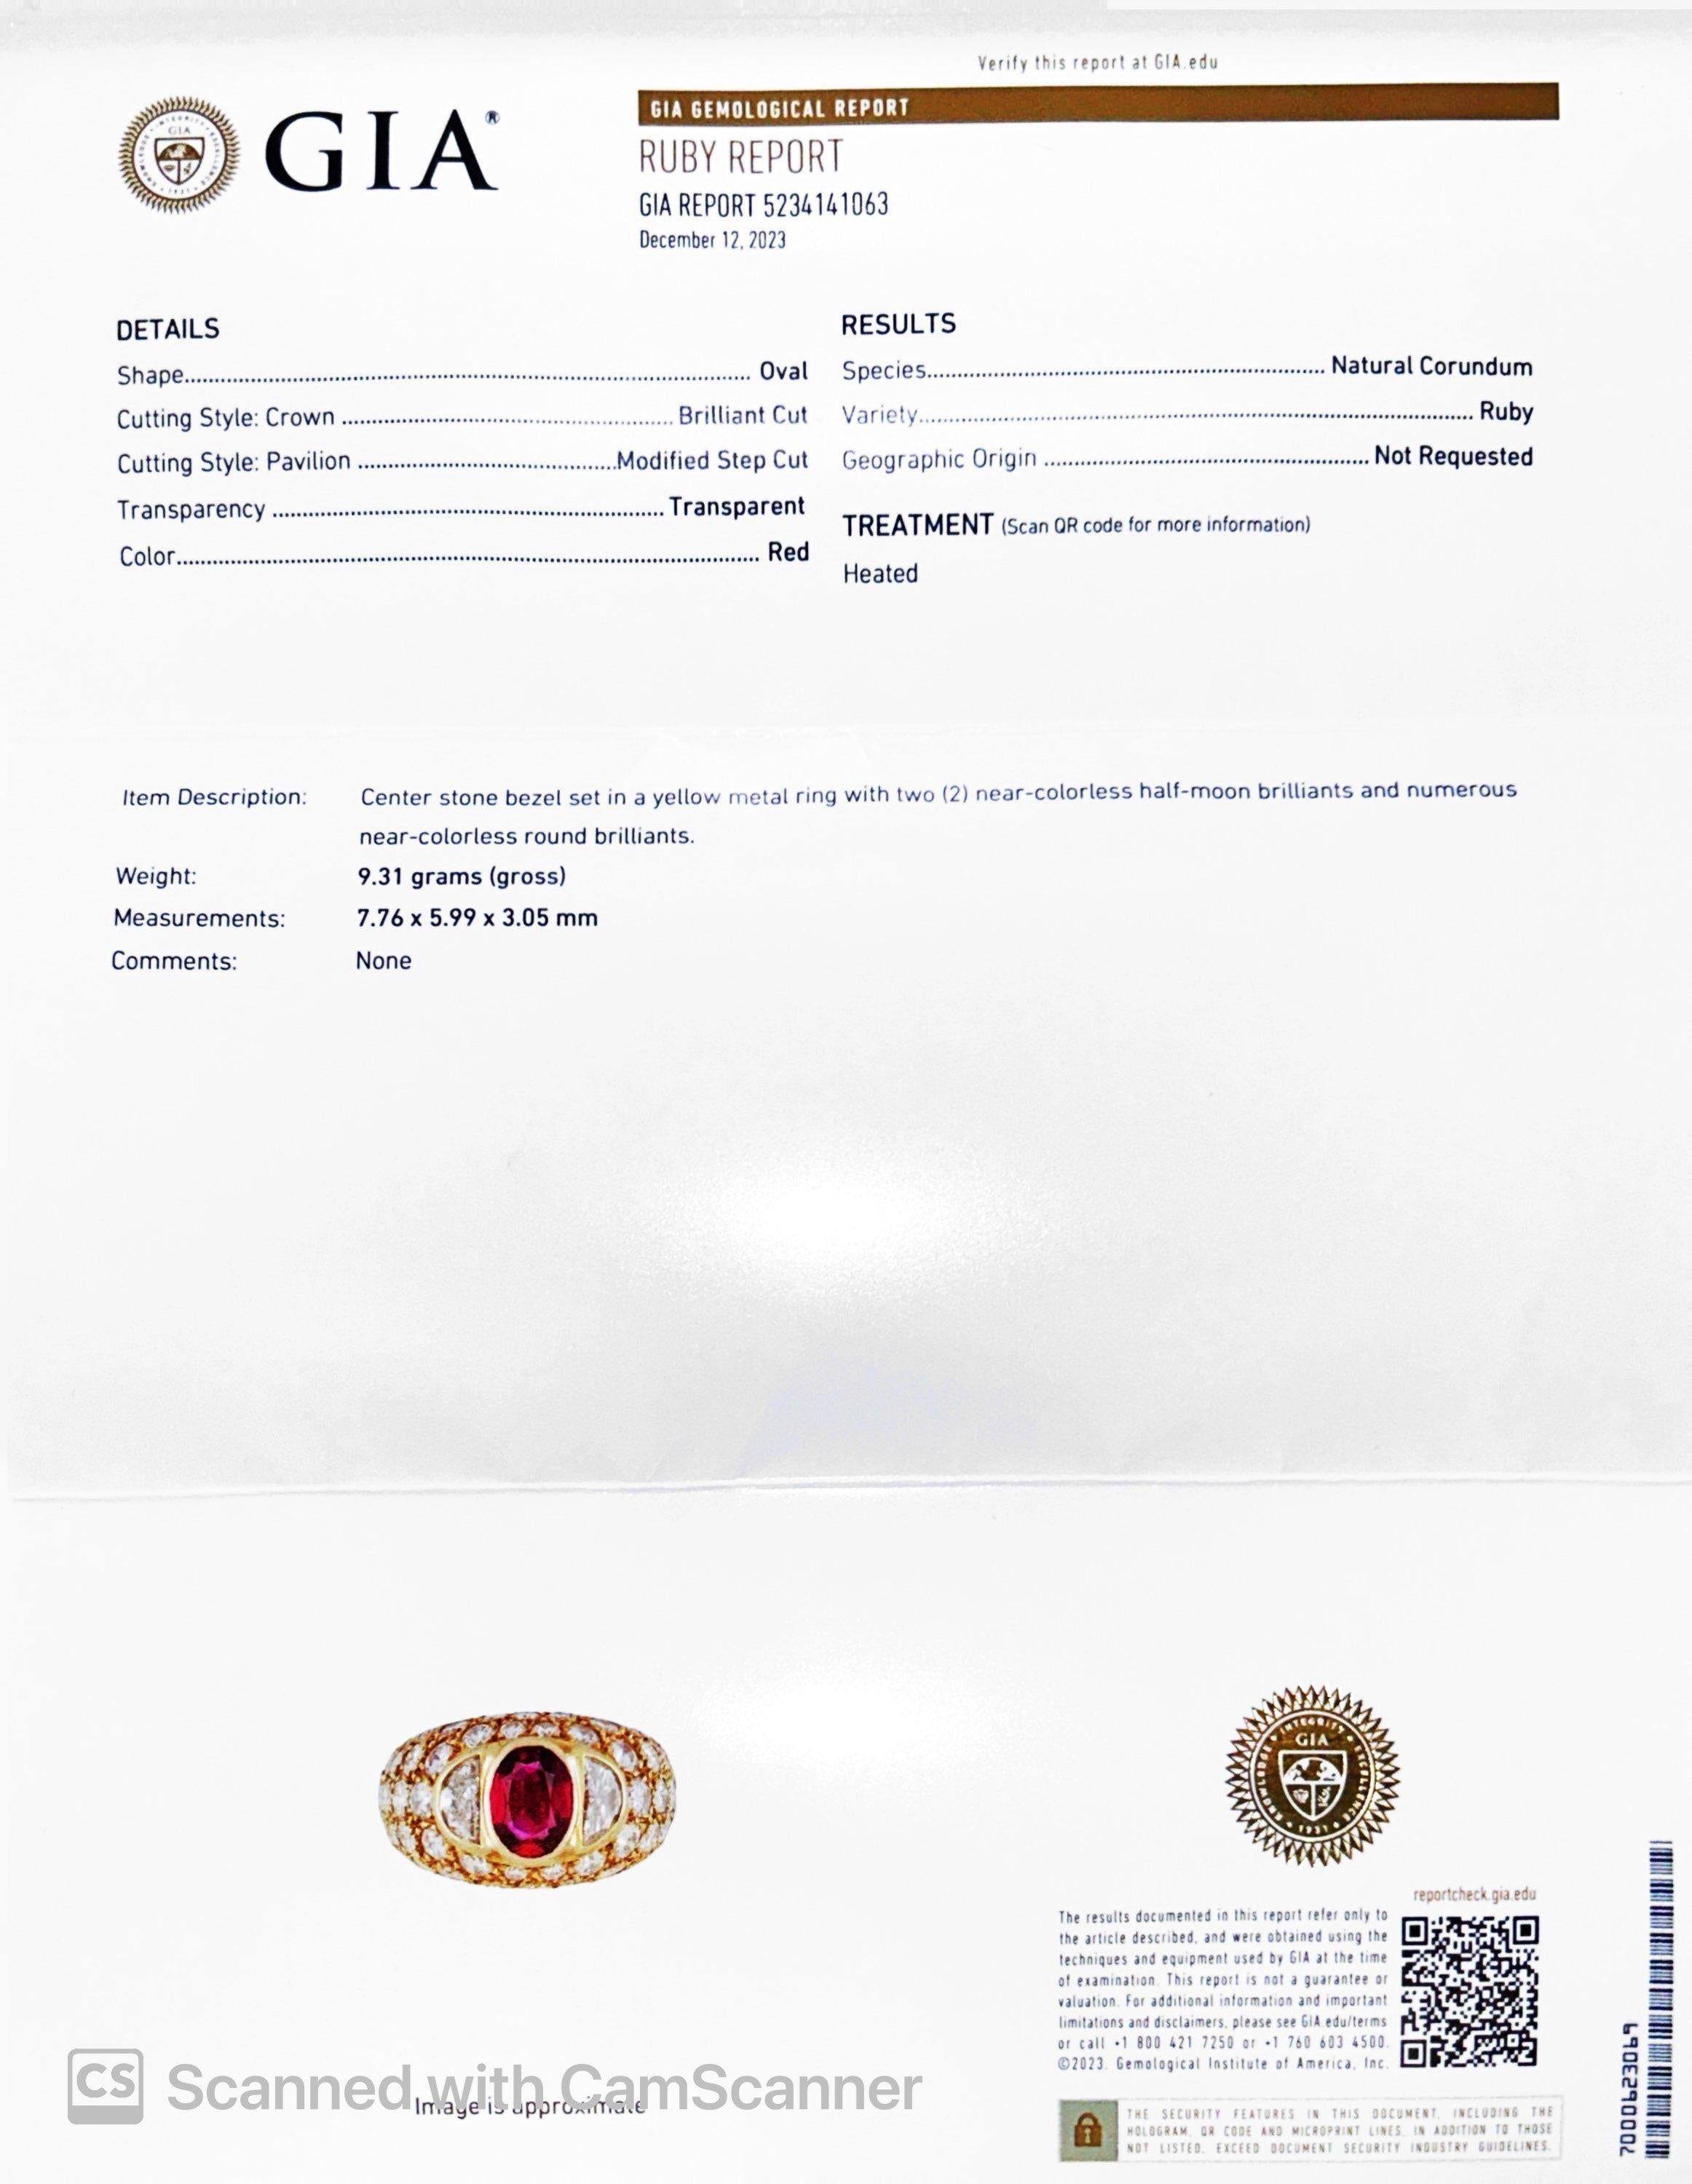 Item Details:
Ring Size: 6
Metal Type: 18K Yellow Gold [Hallmarked, and Tested]
Weight: 9.3 grams

Ruby Details: Natural Ruby, Heated, Red, 2.00ct, with GIA Report#5234141063

Diamond Details: 2.50ct total weight, F Color, VS Clarity, Half Moon